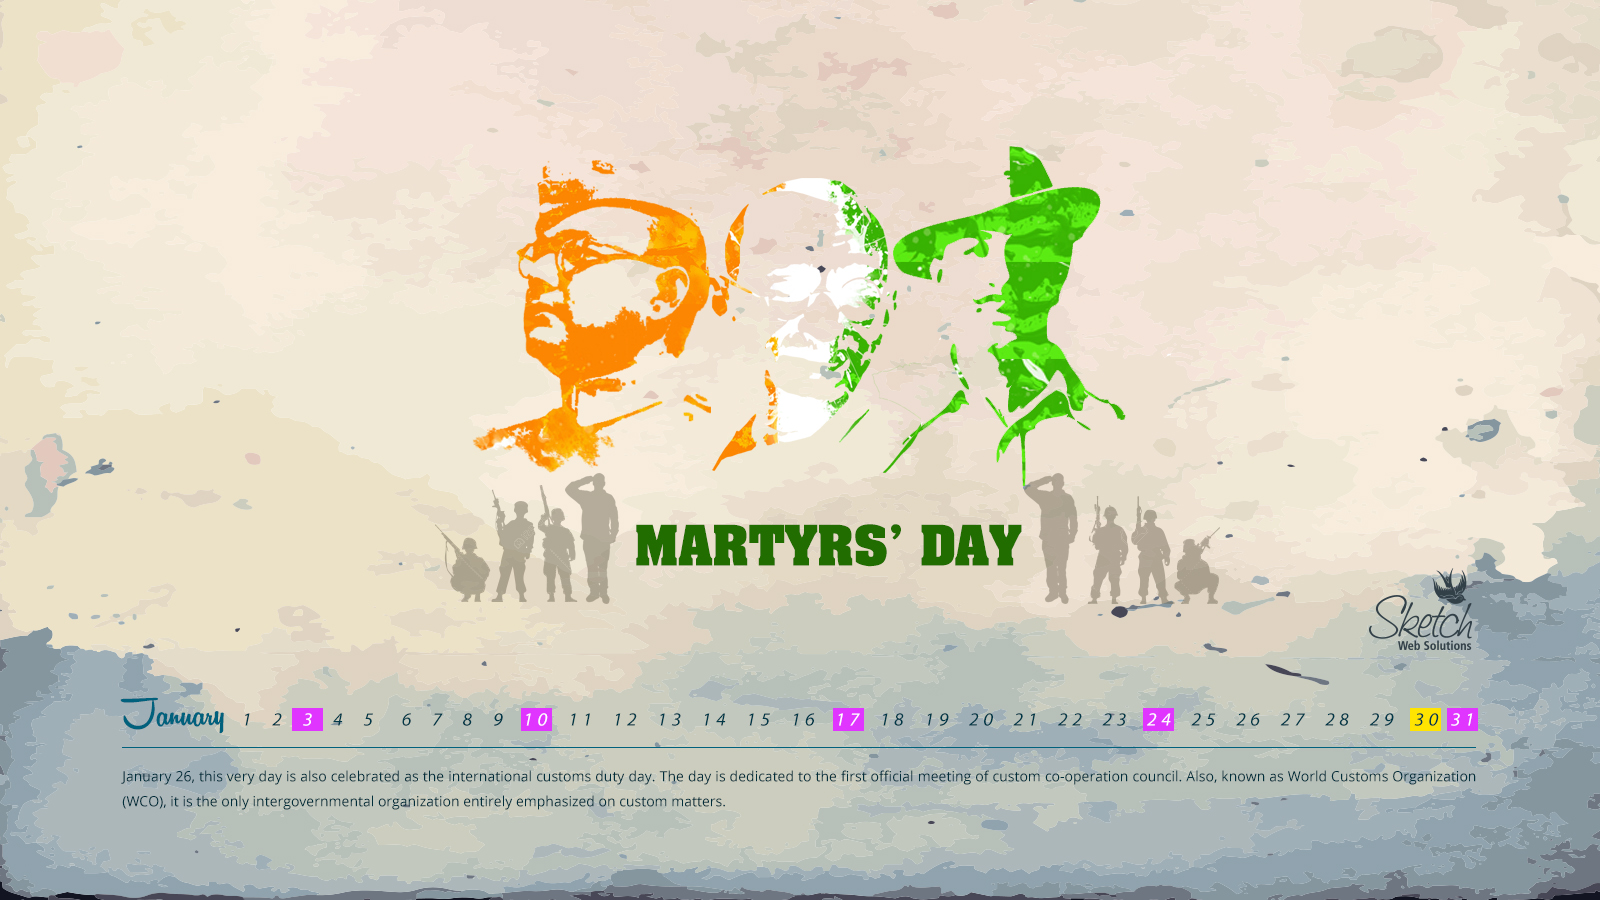 Martyrs’ day 16